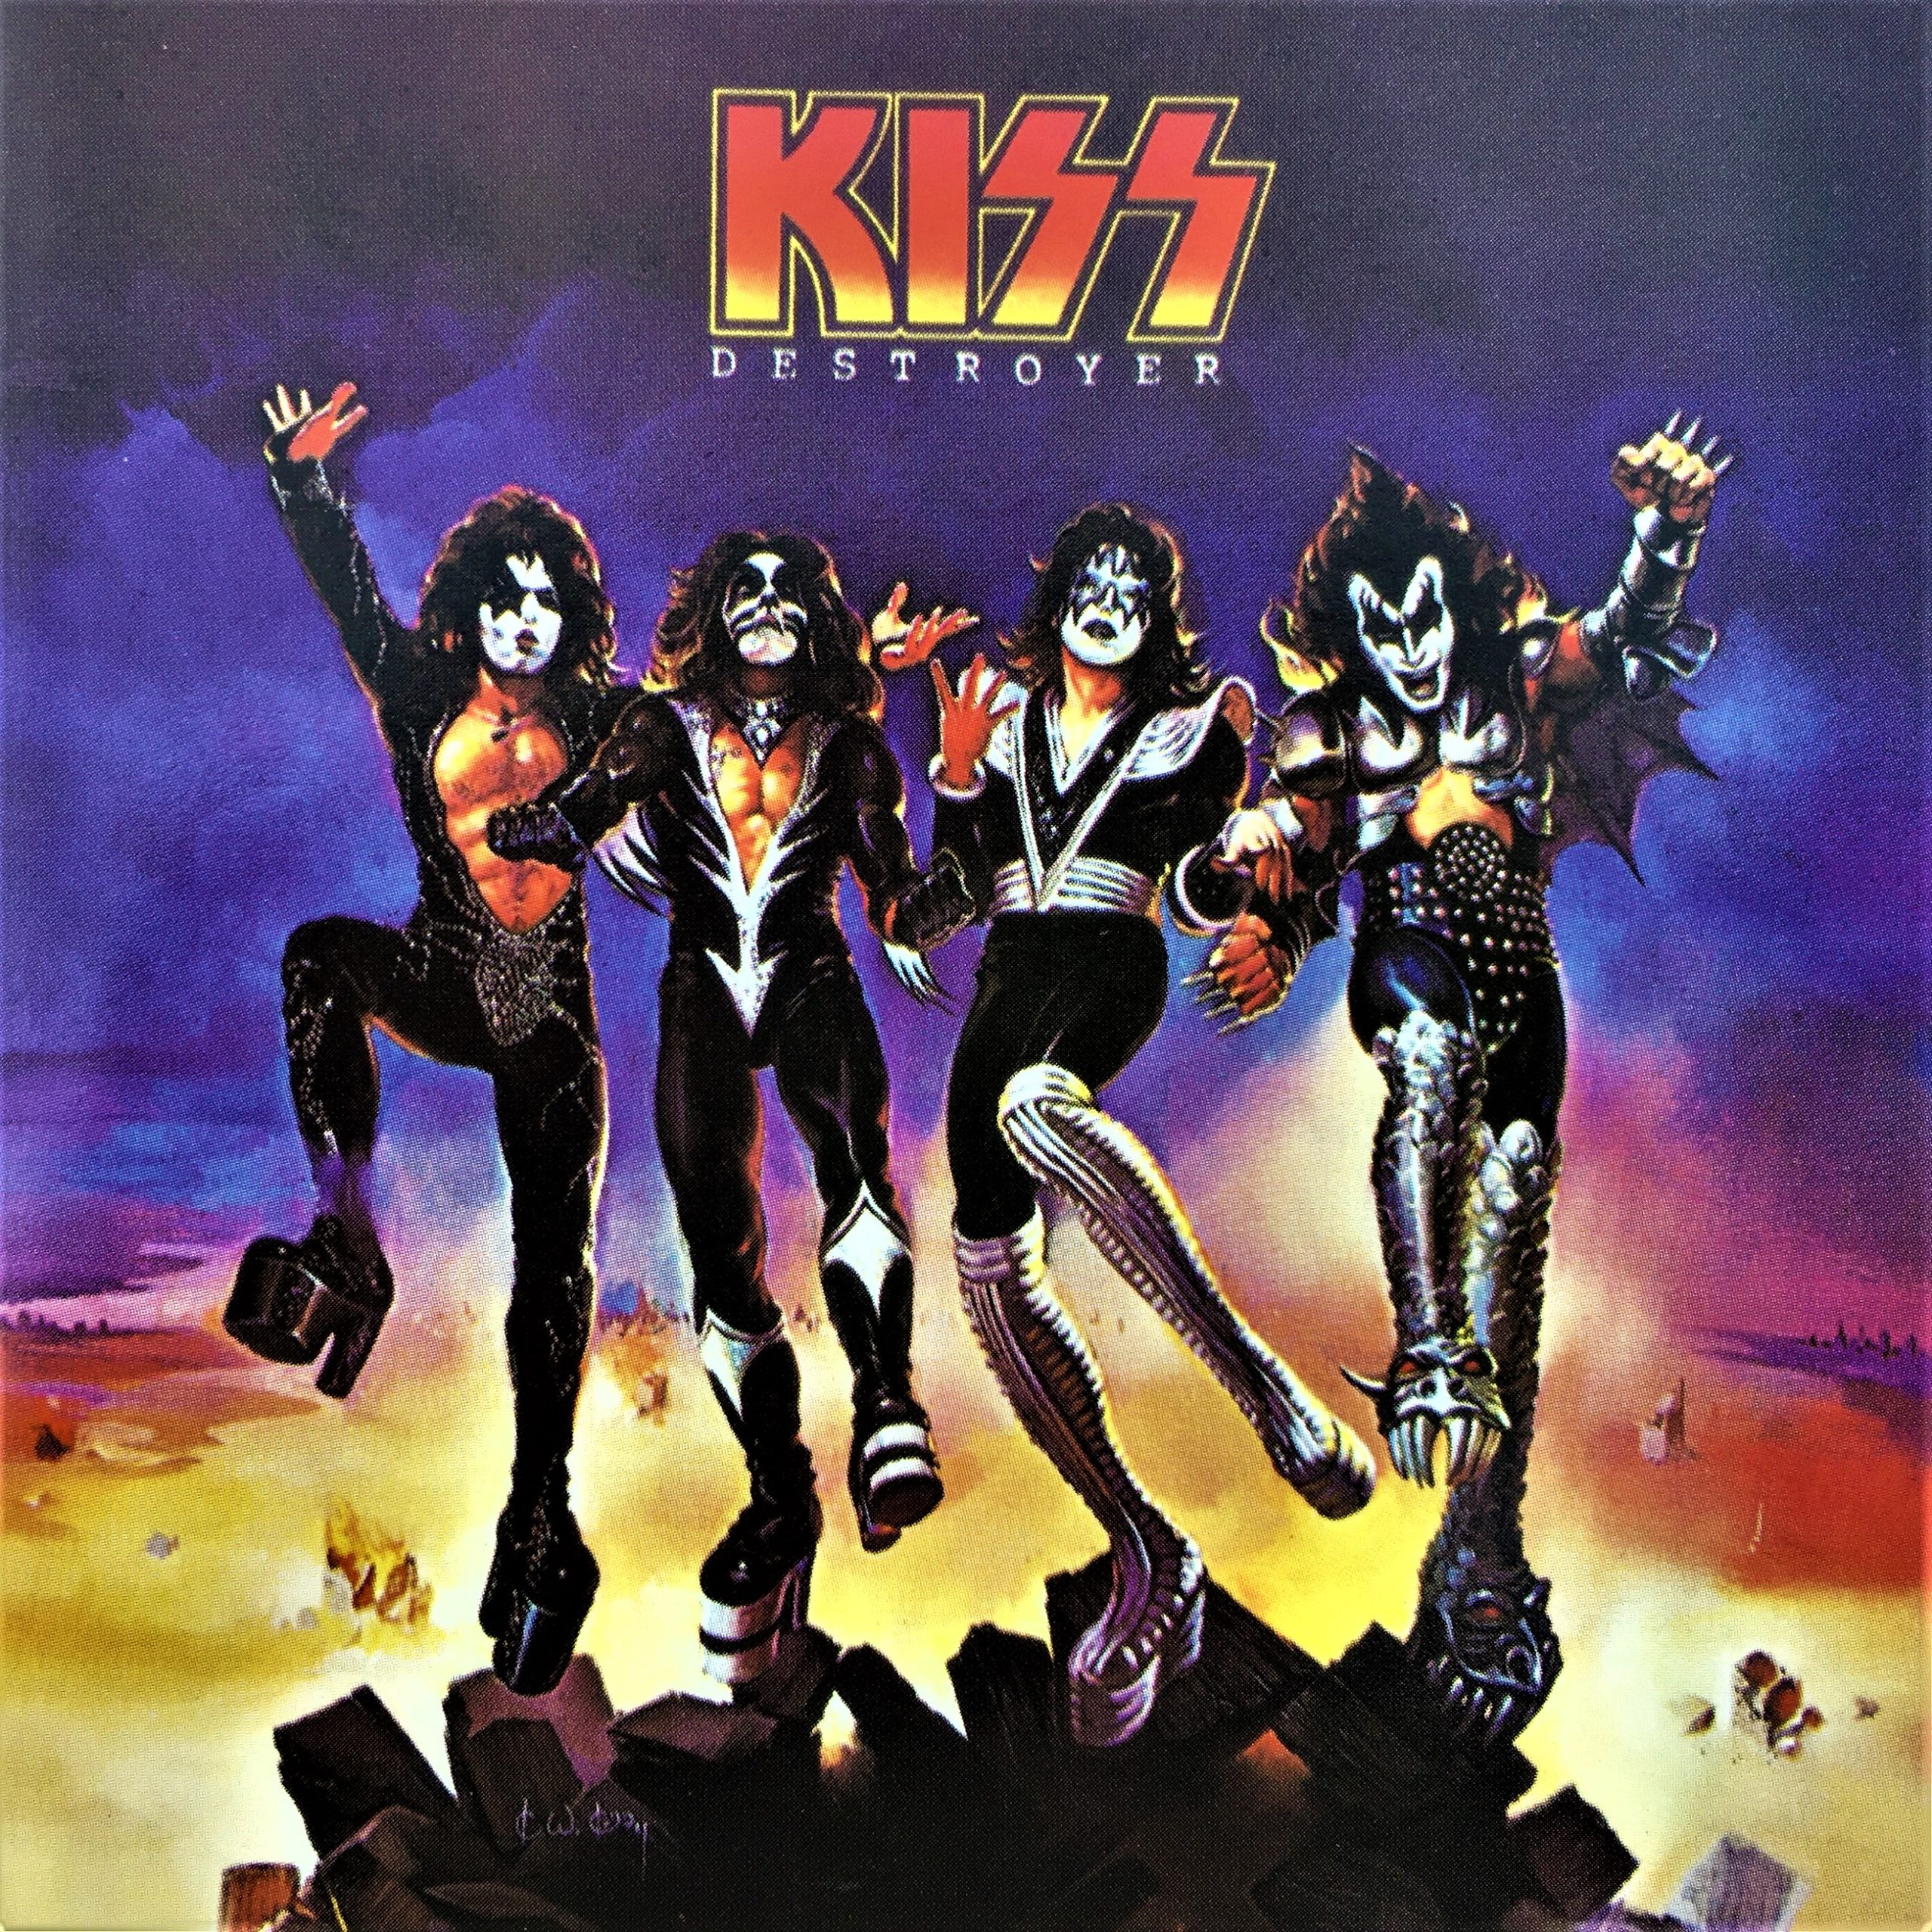 Retro Style Metal Sign Kiss "Destroyer"